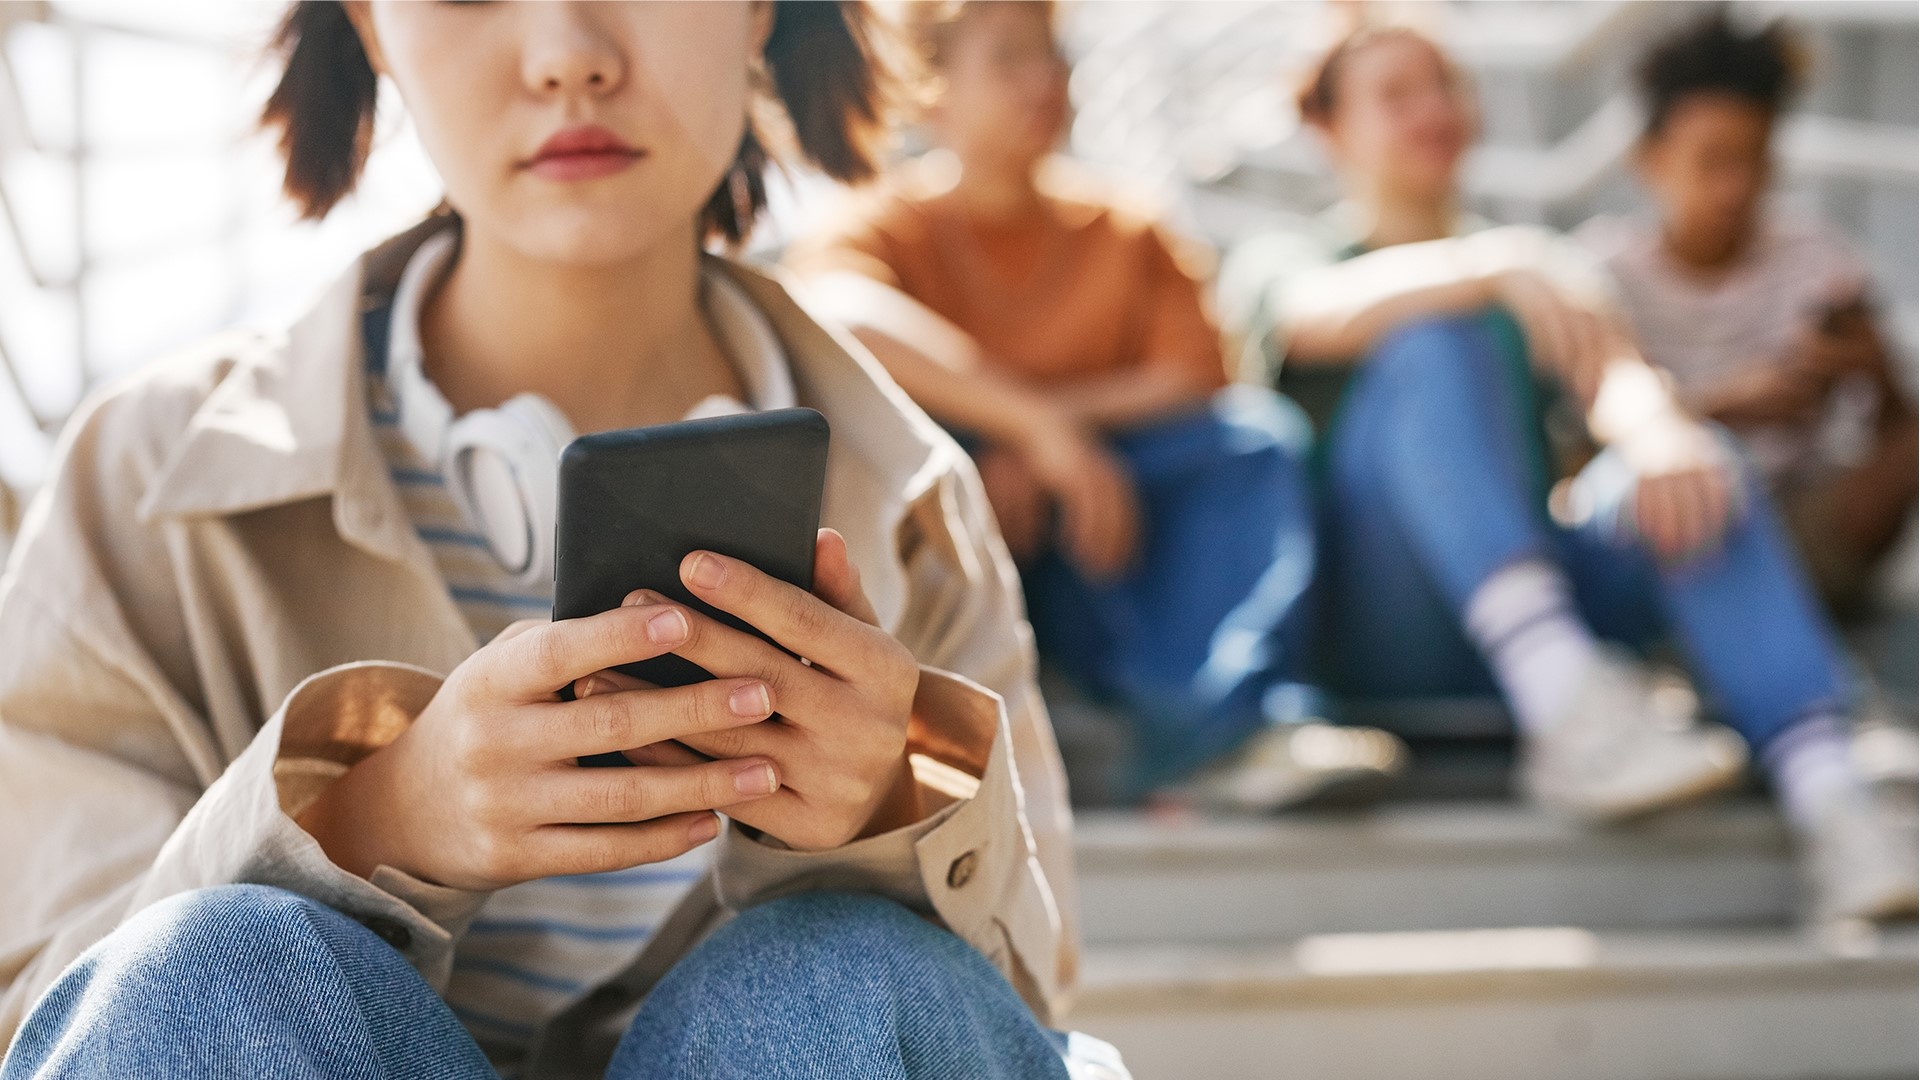 Parents are concerned about the impact social media apps might have on their children's body image. Here are some tips to approach the subject.